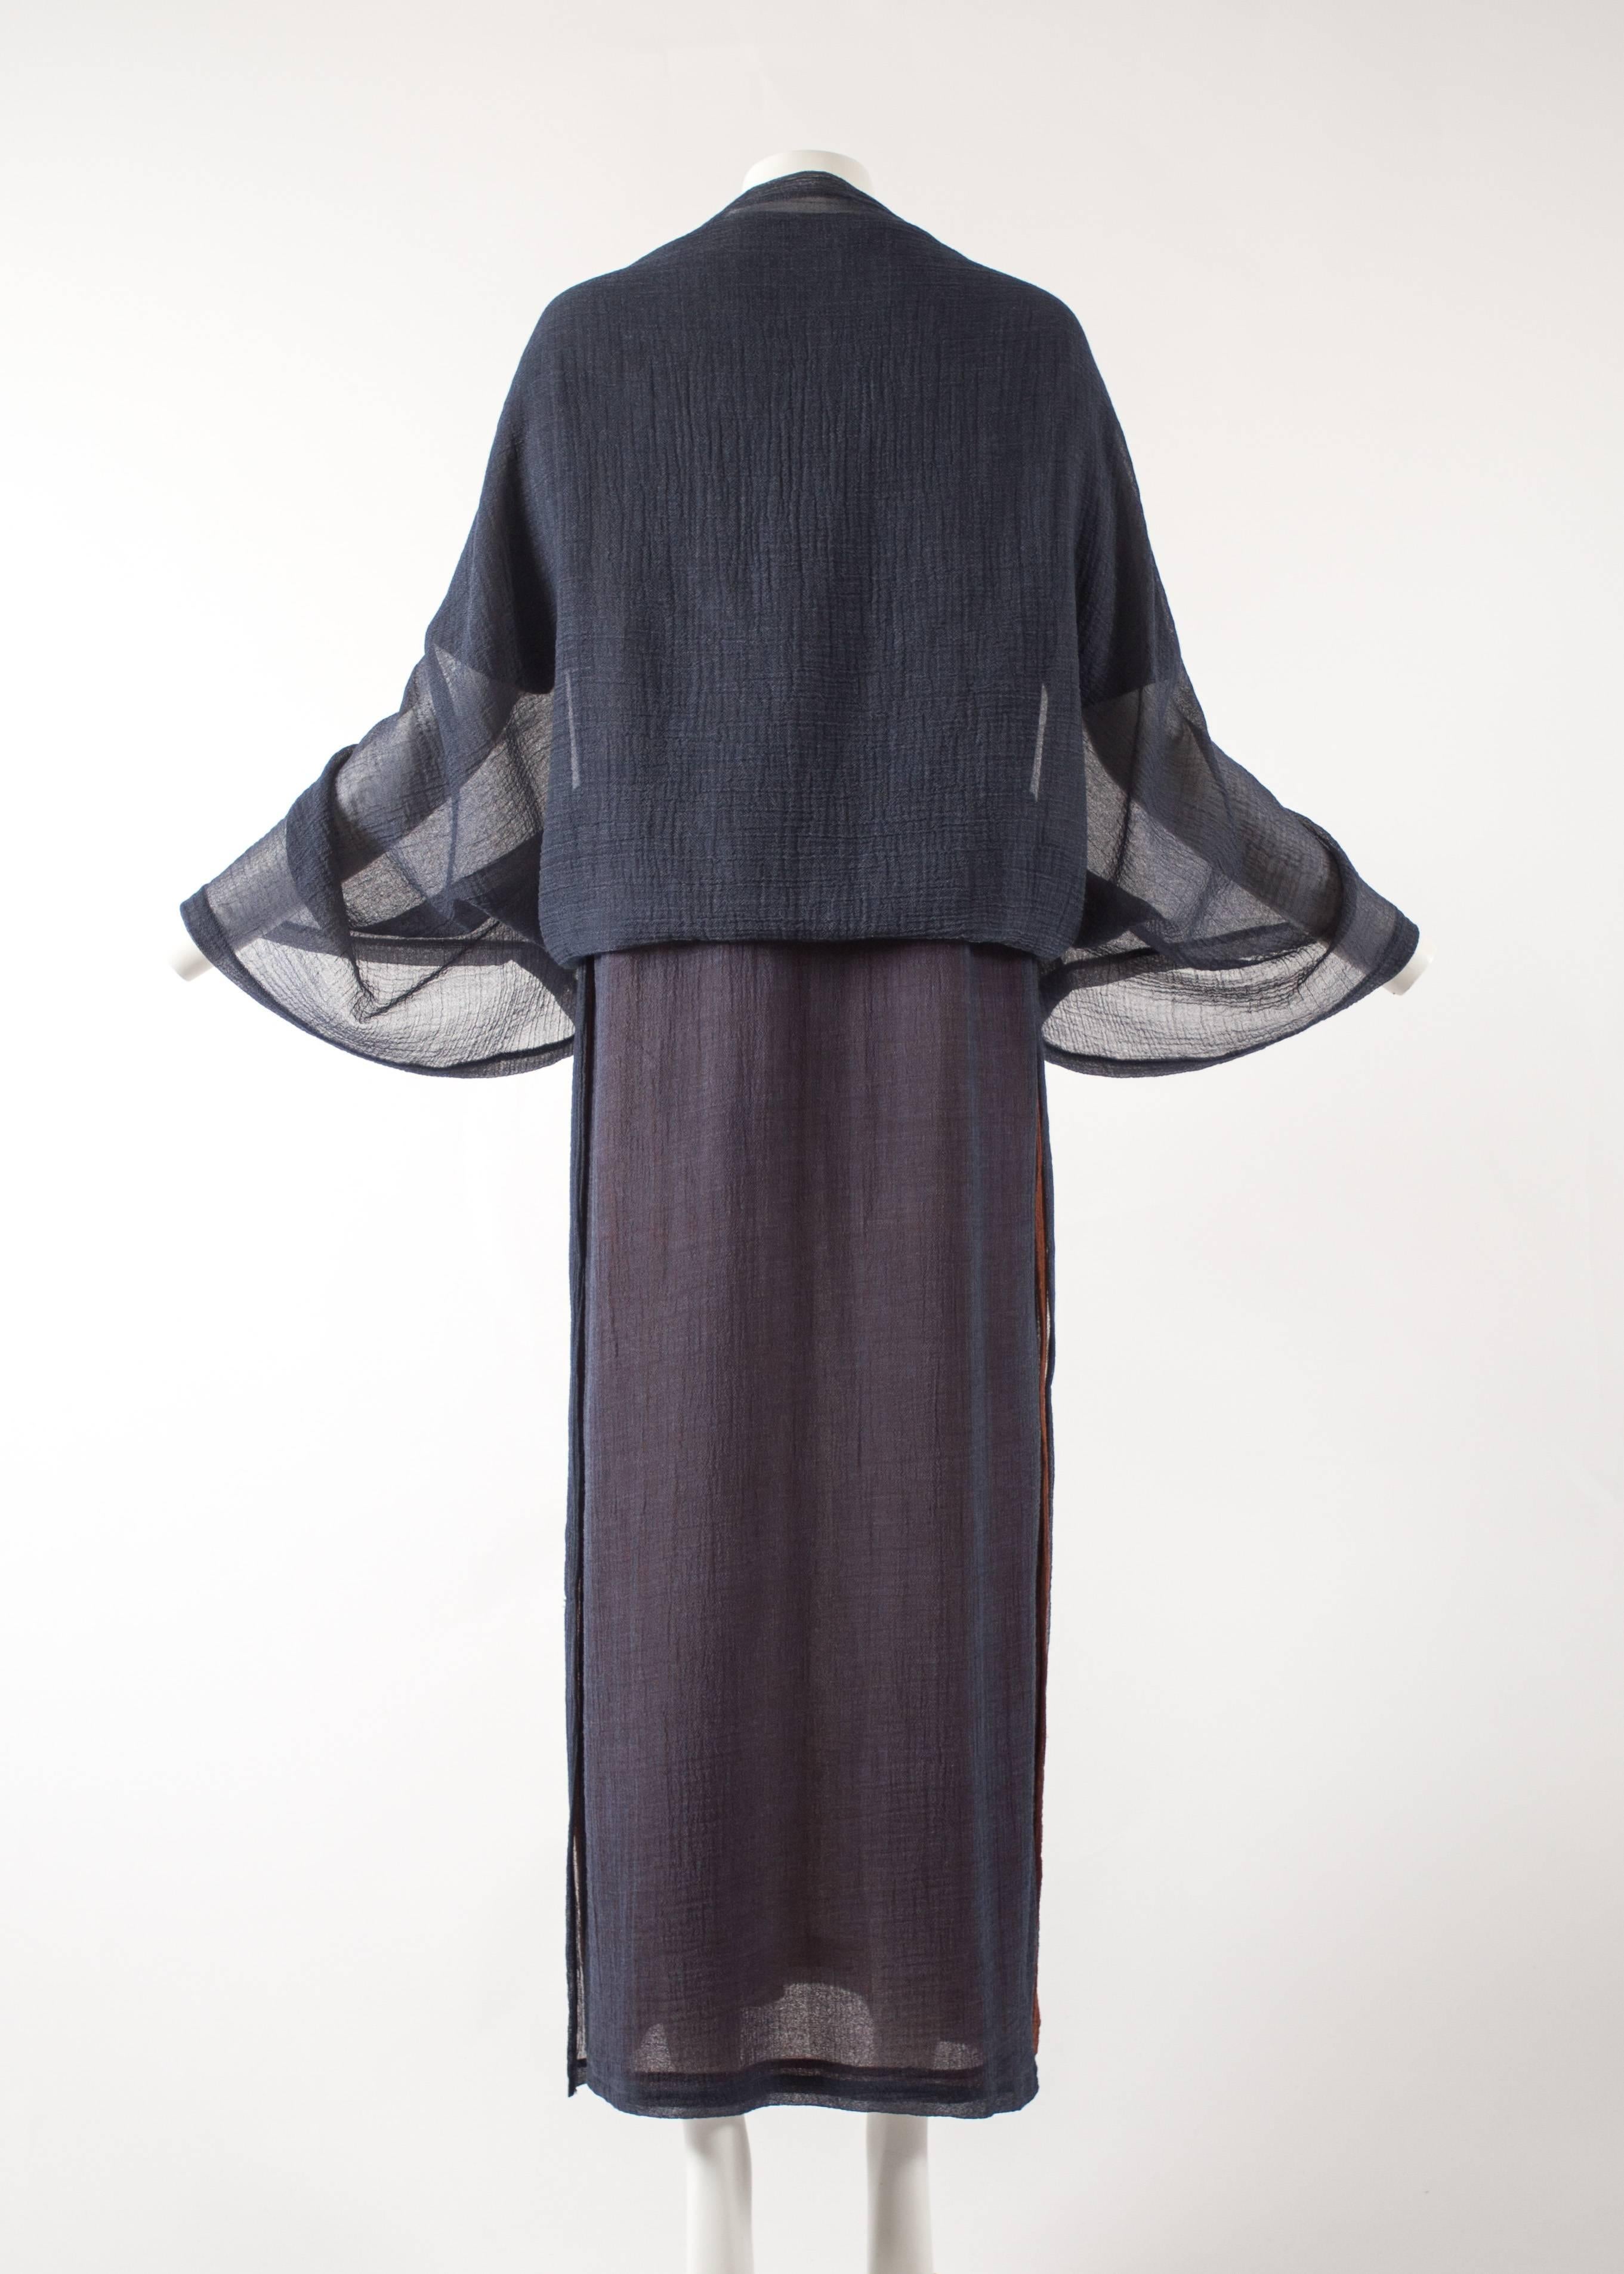 Issey Miayke tricolour layered t-shirt dress with integrated cardigan, c. 1990s In Good Condition For Sale In London, GB